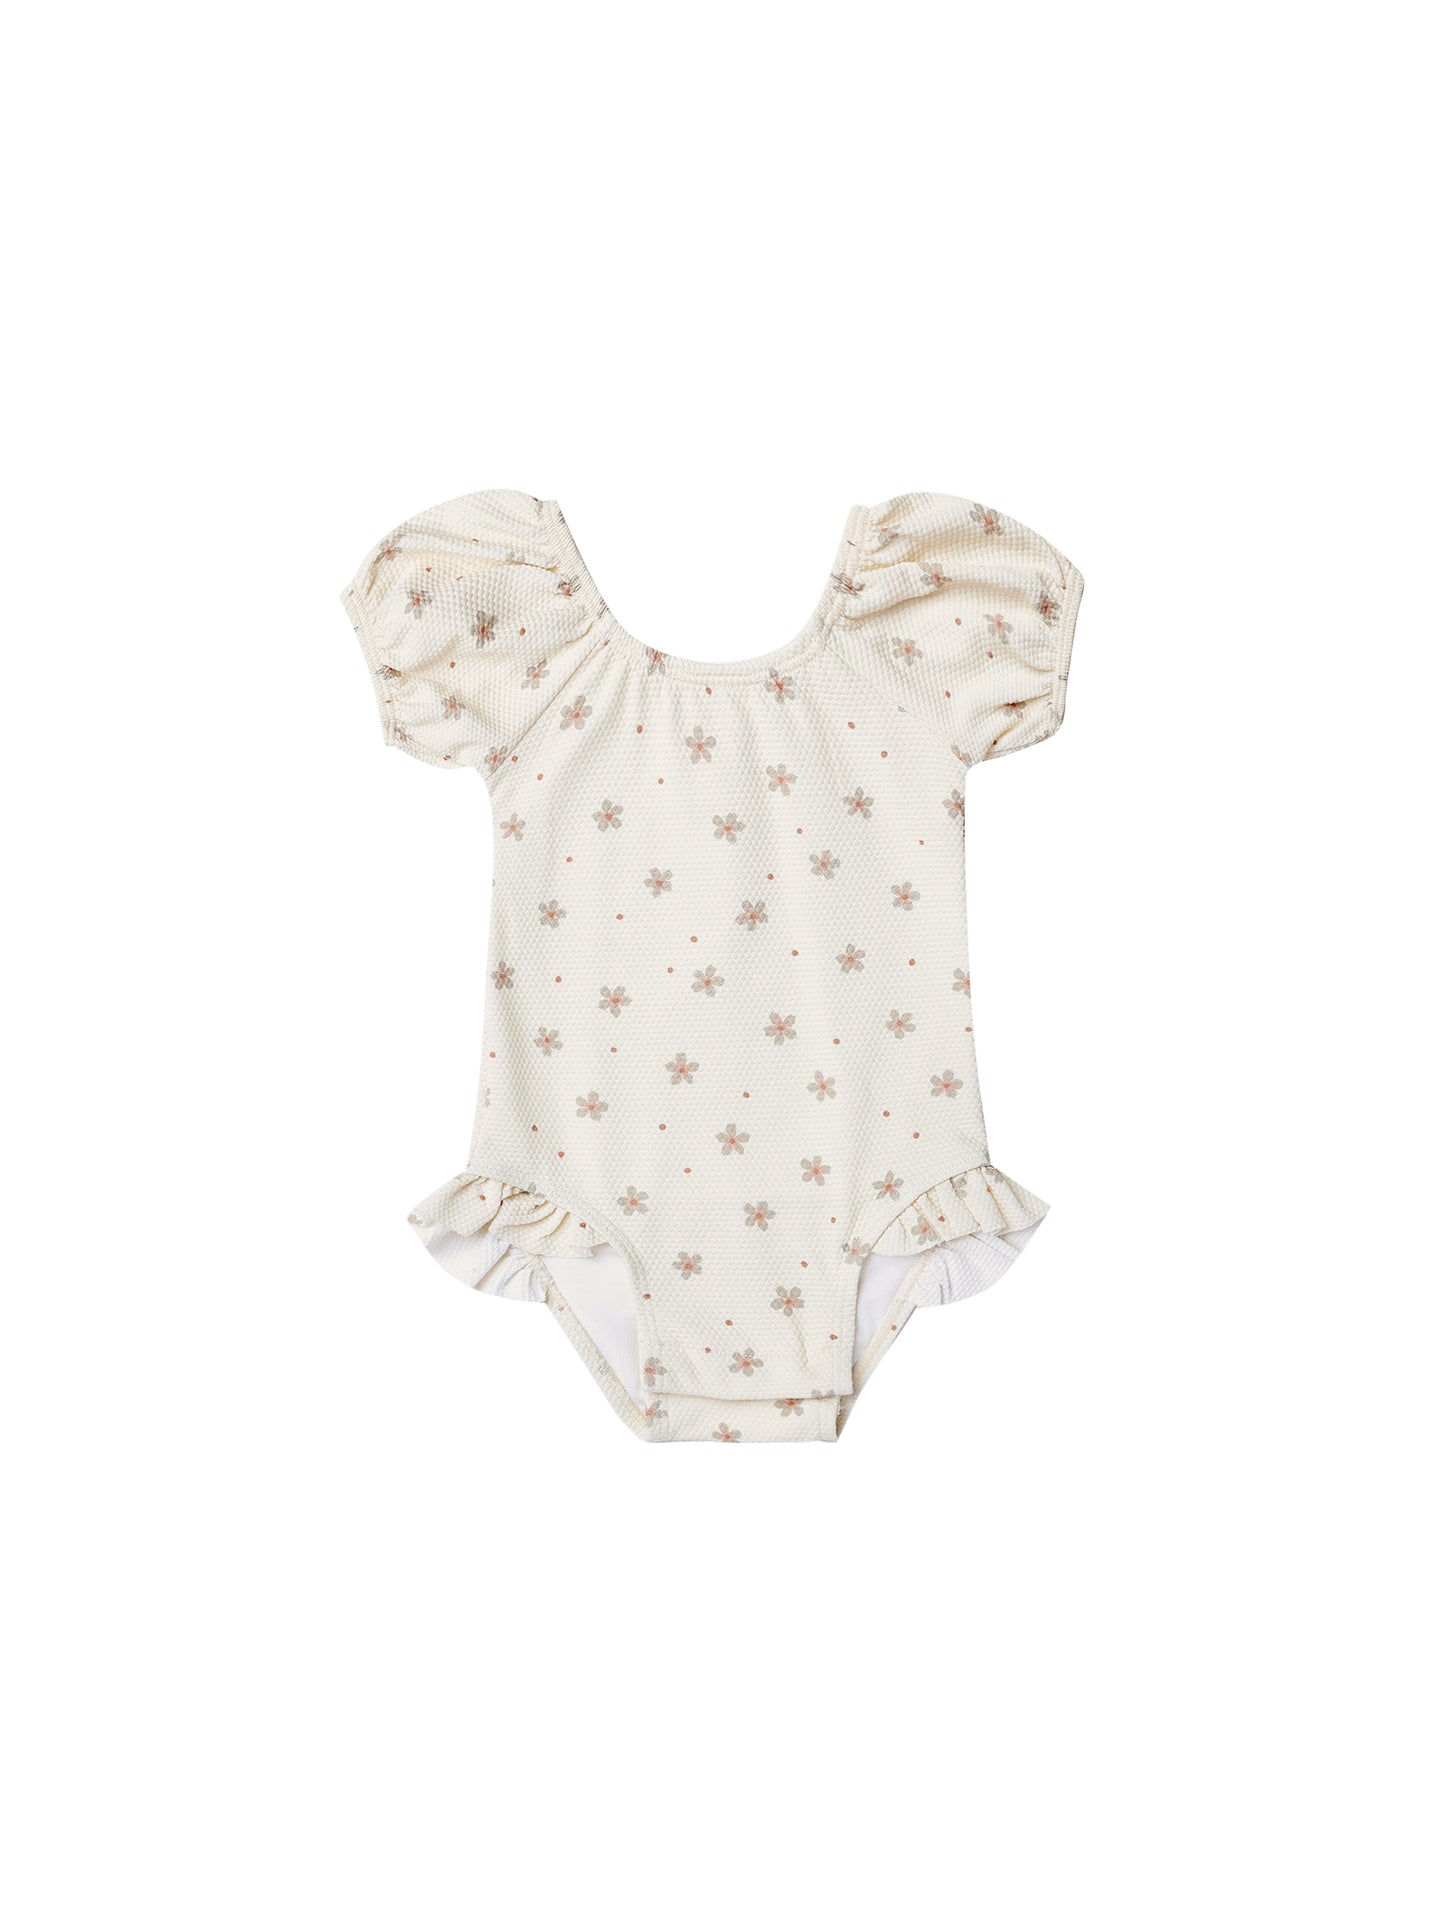 Quincy Mae | Catalina One Piece Swimsuit (Dotty Floral)